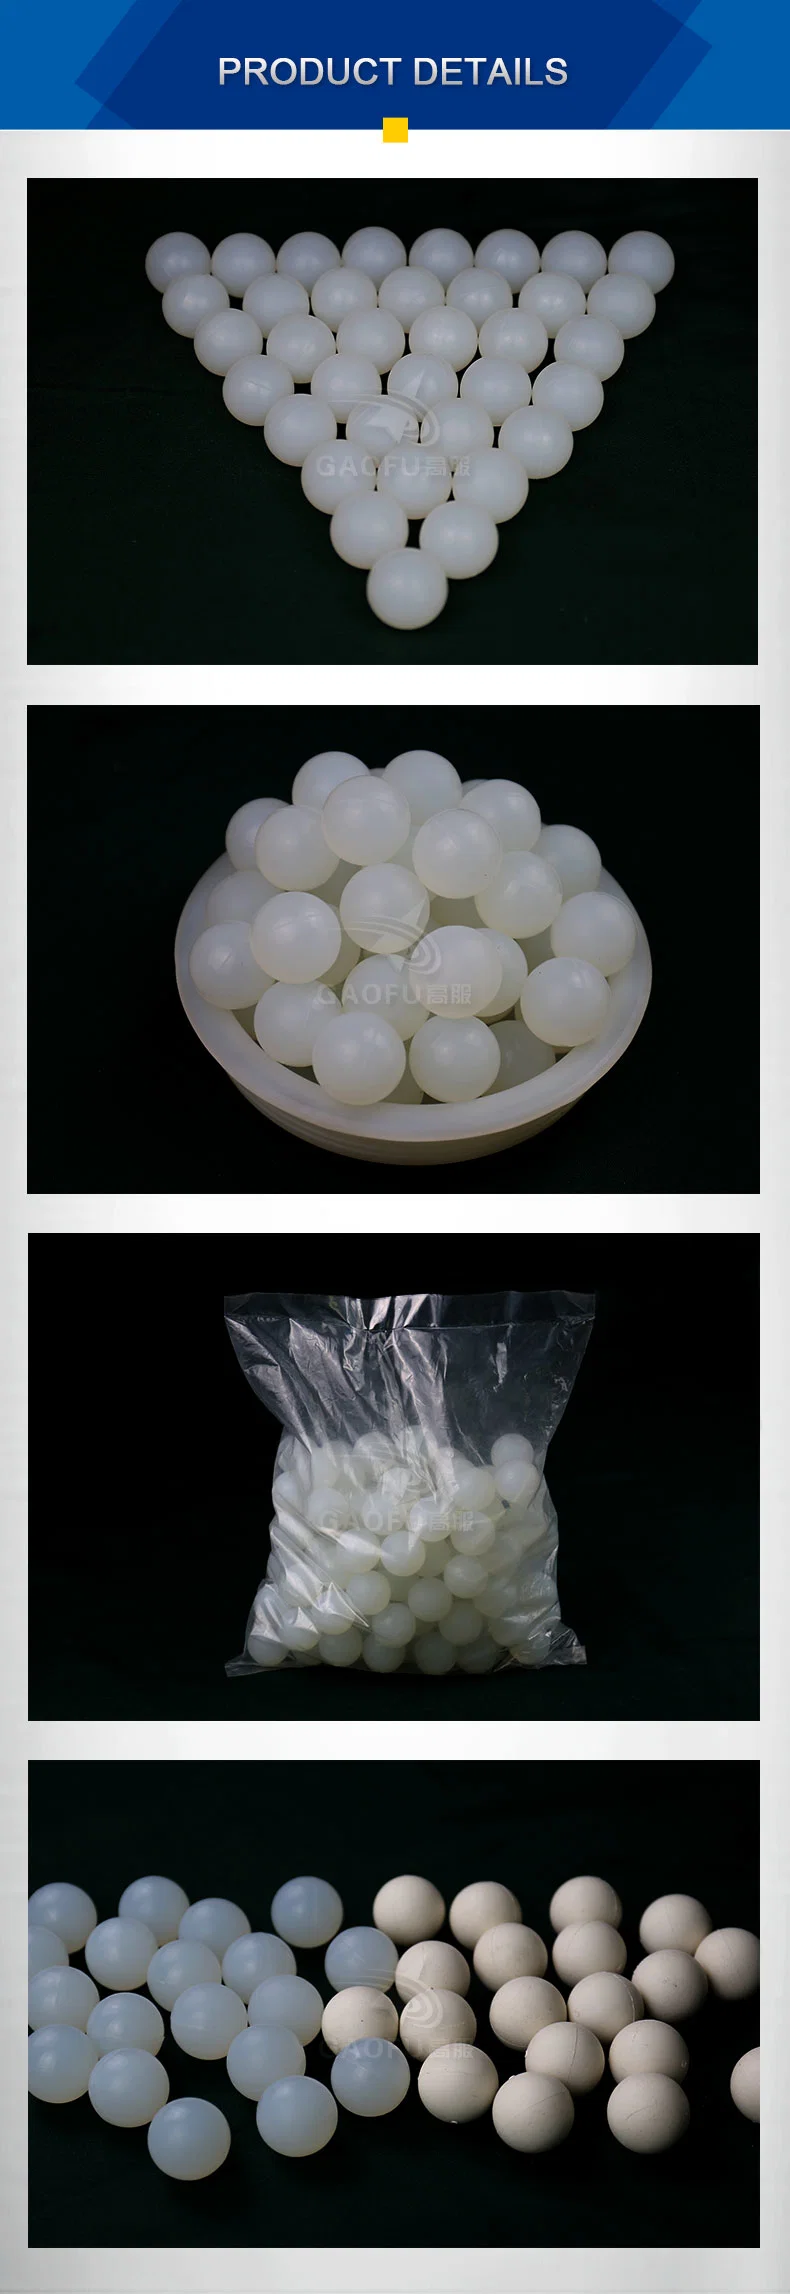 Multi-Material Vibrating Screen Accessories Net Cleaning Device Bouncing Ball